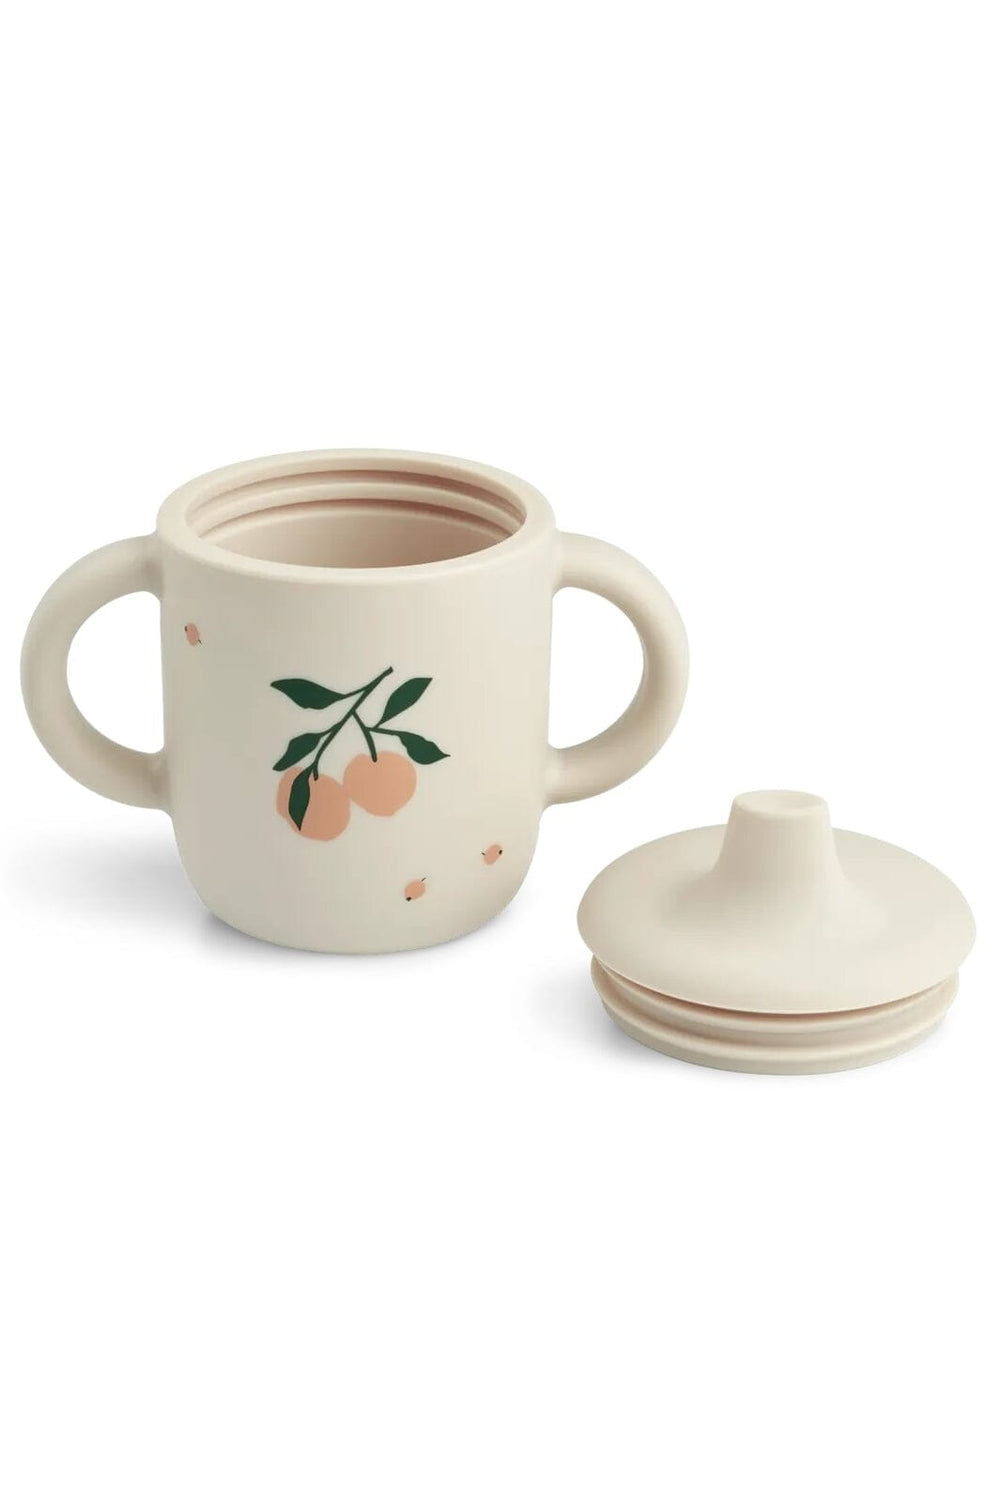 Liewood - Neil Sippy Cup - Peach / Sea Shell Mix Drikkedunke 